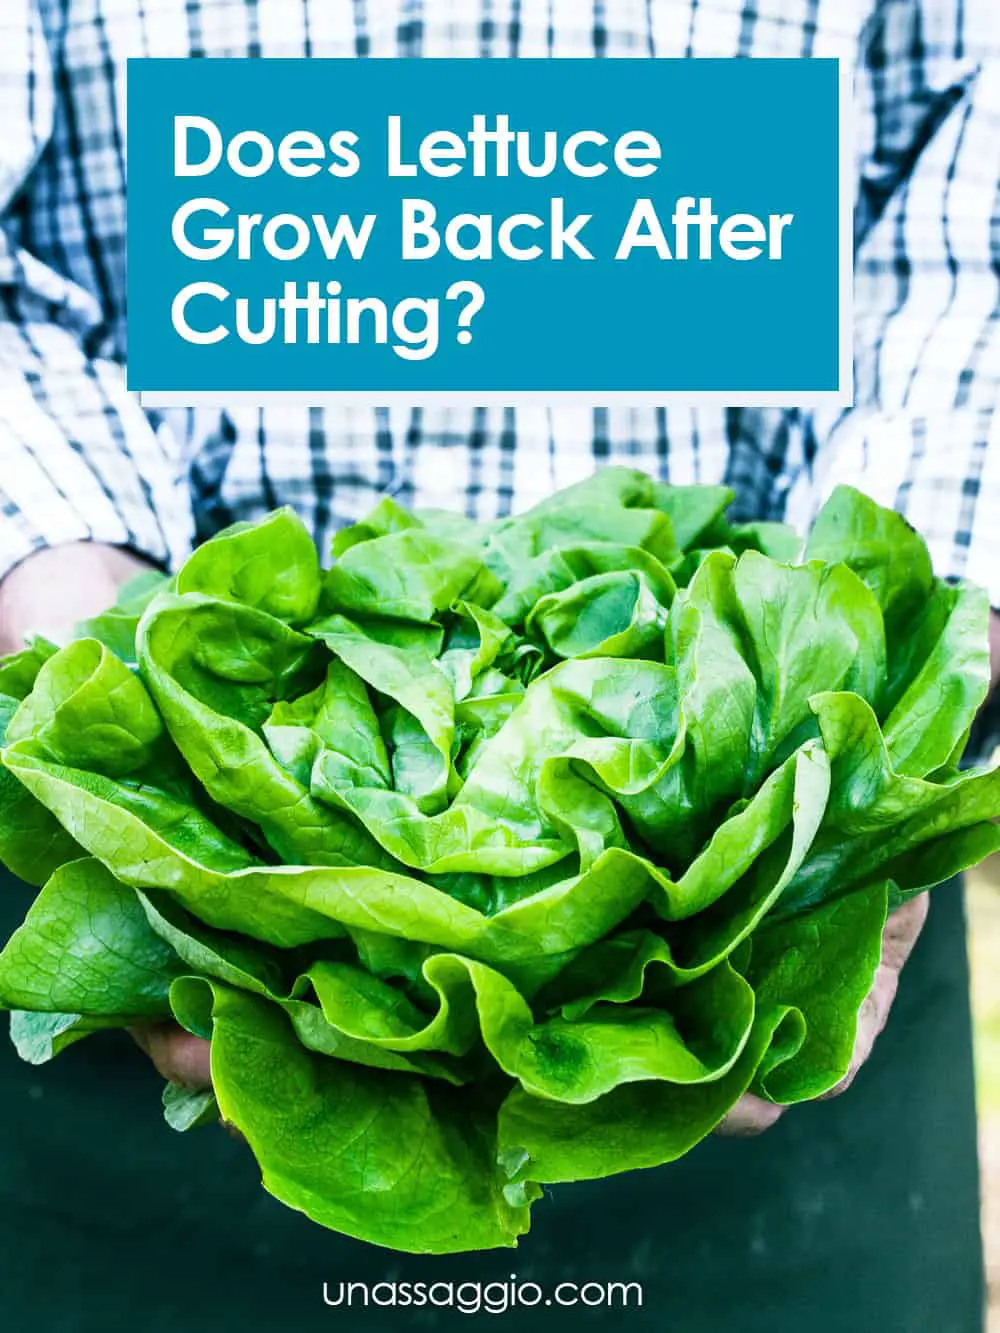 Does Lettuce Grow Back After Cutting?